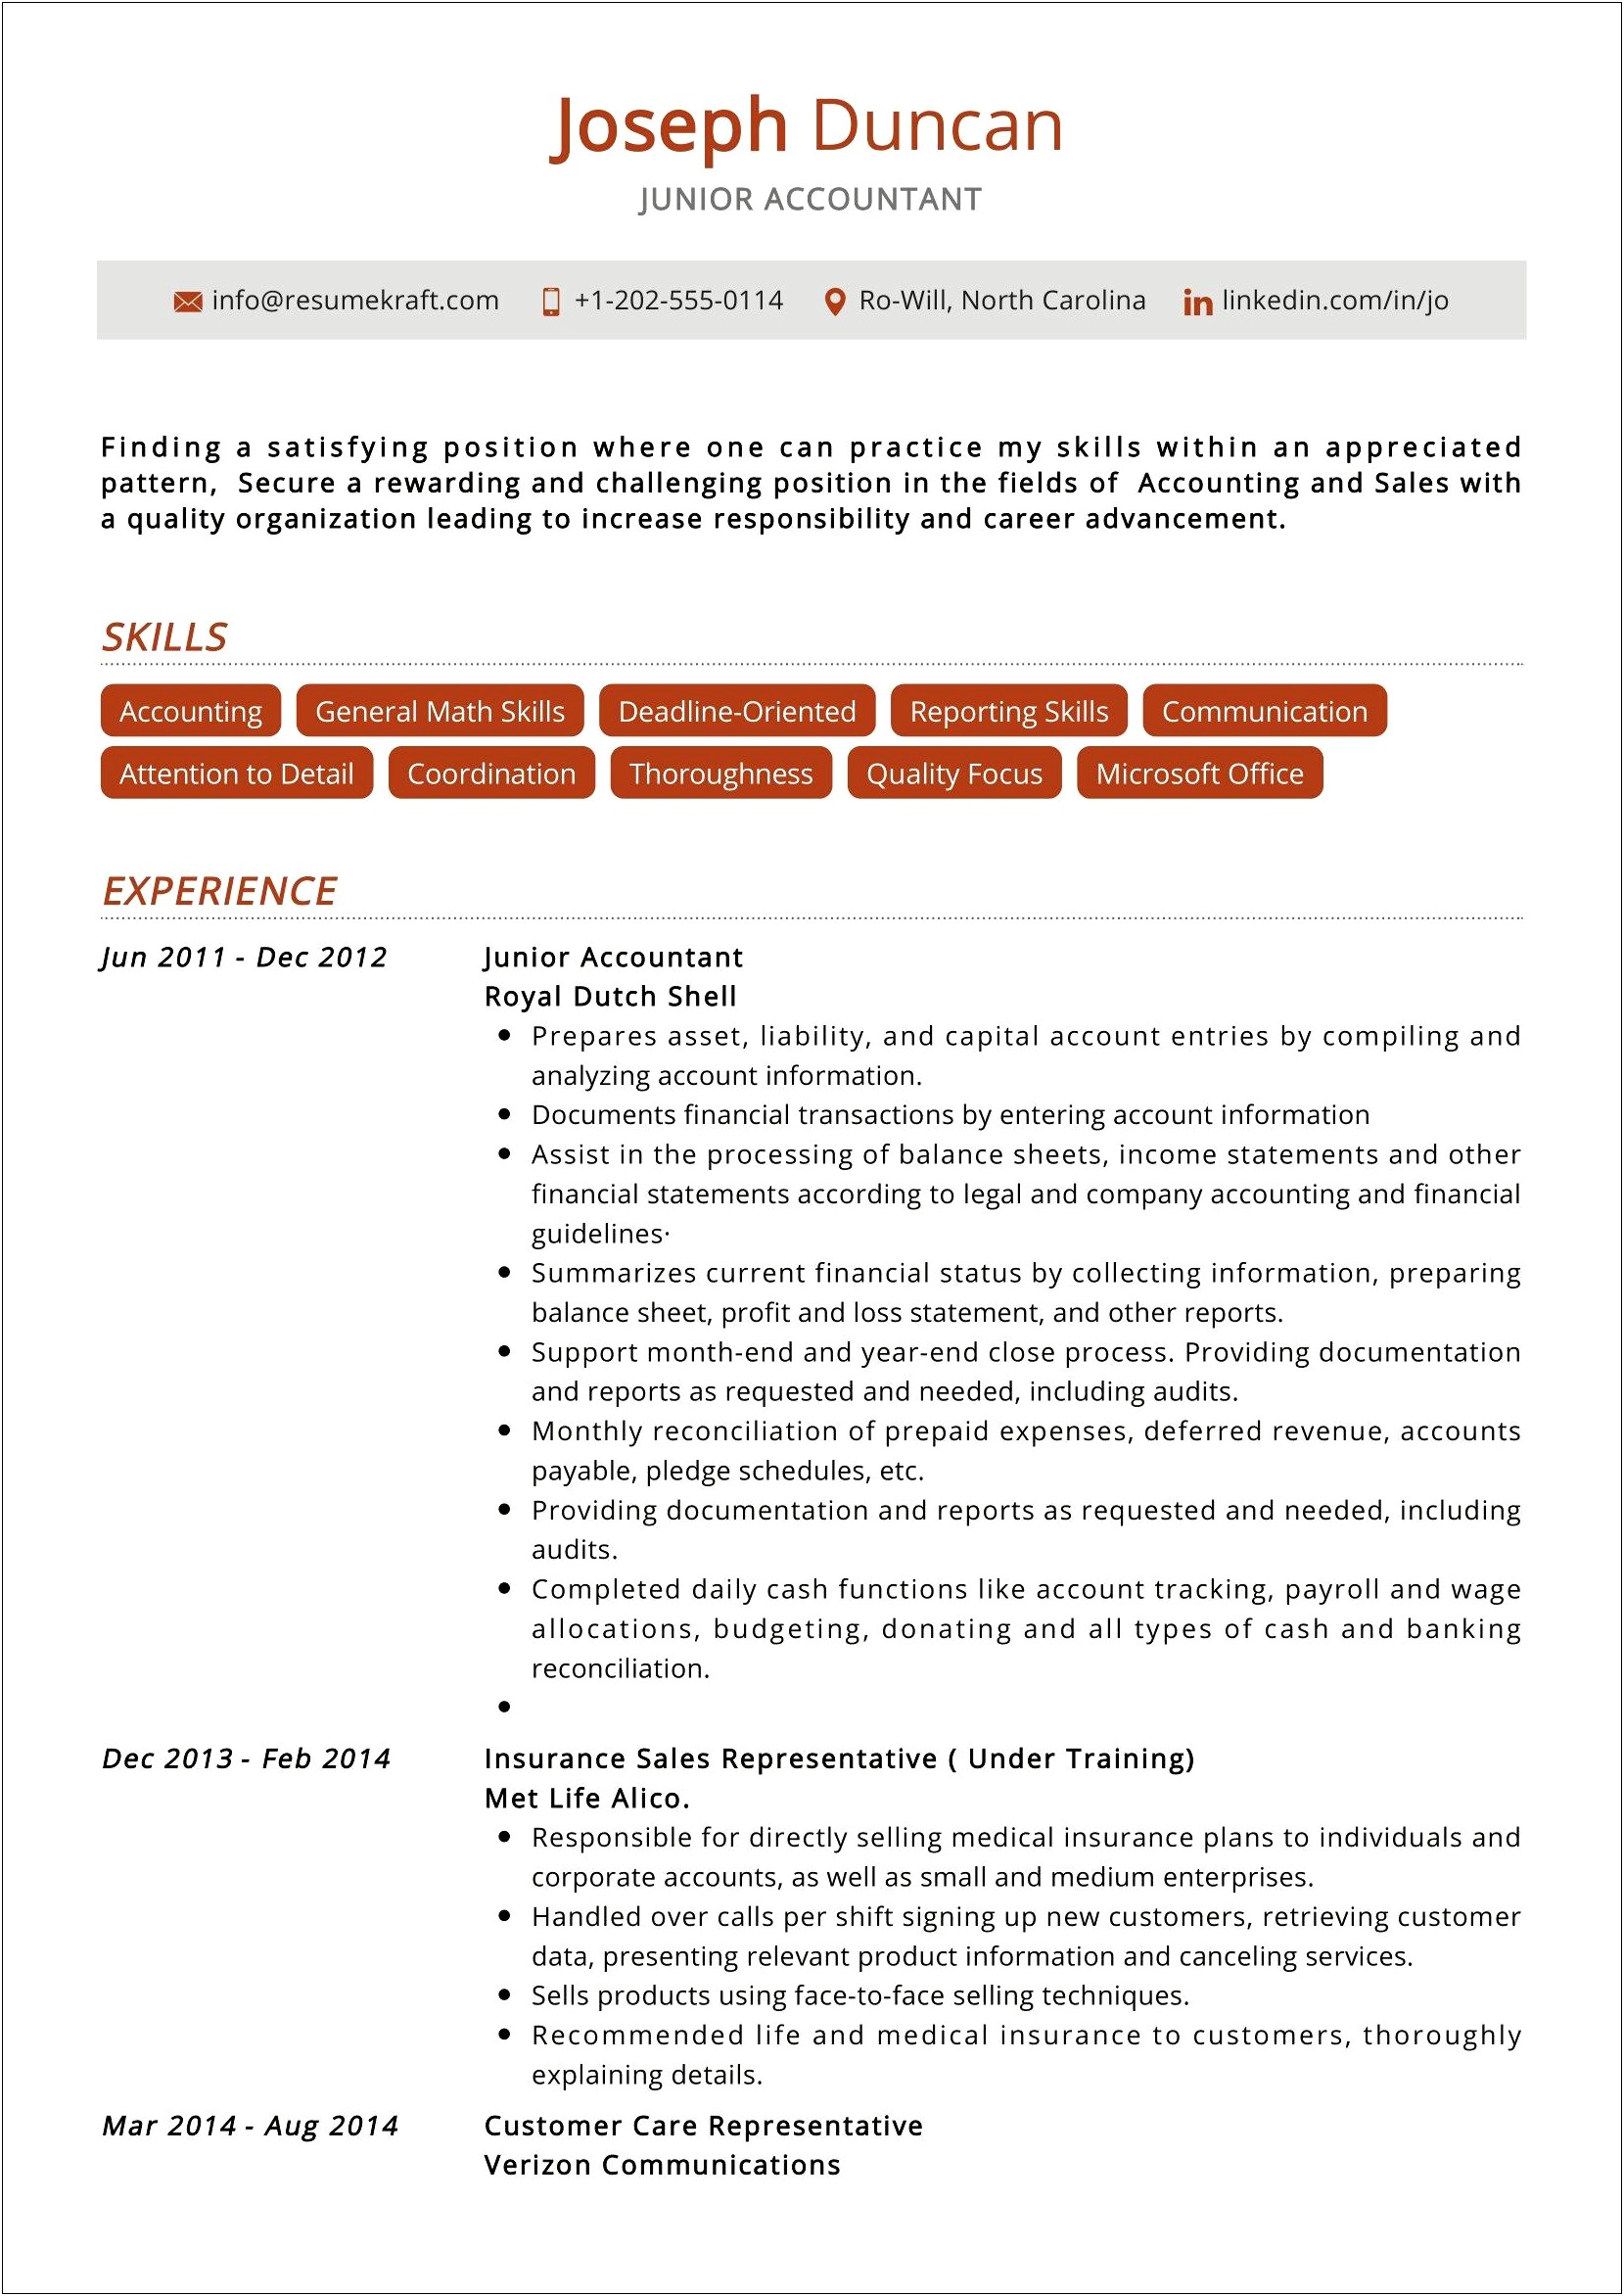 Resume Format Free Download For Accountant